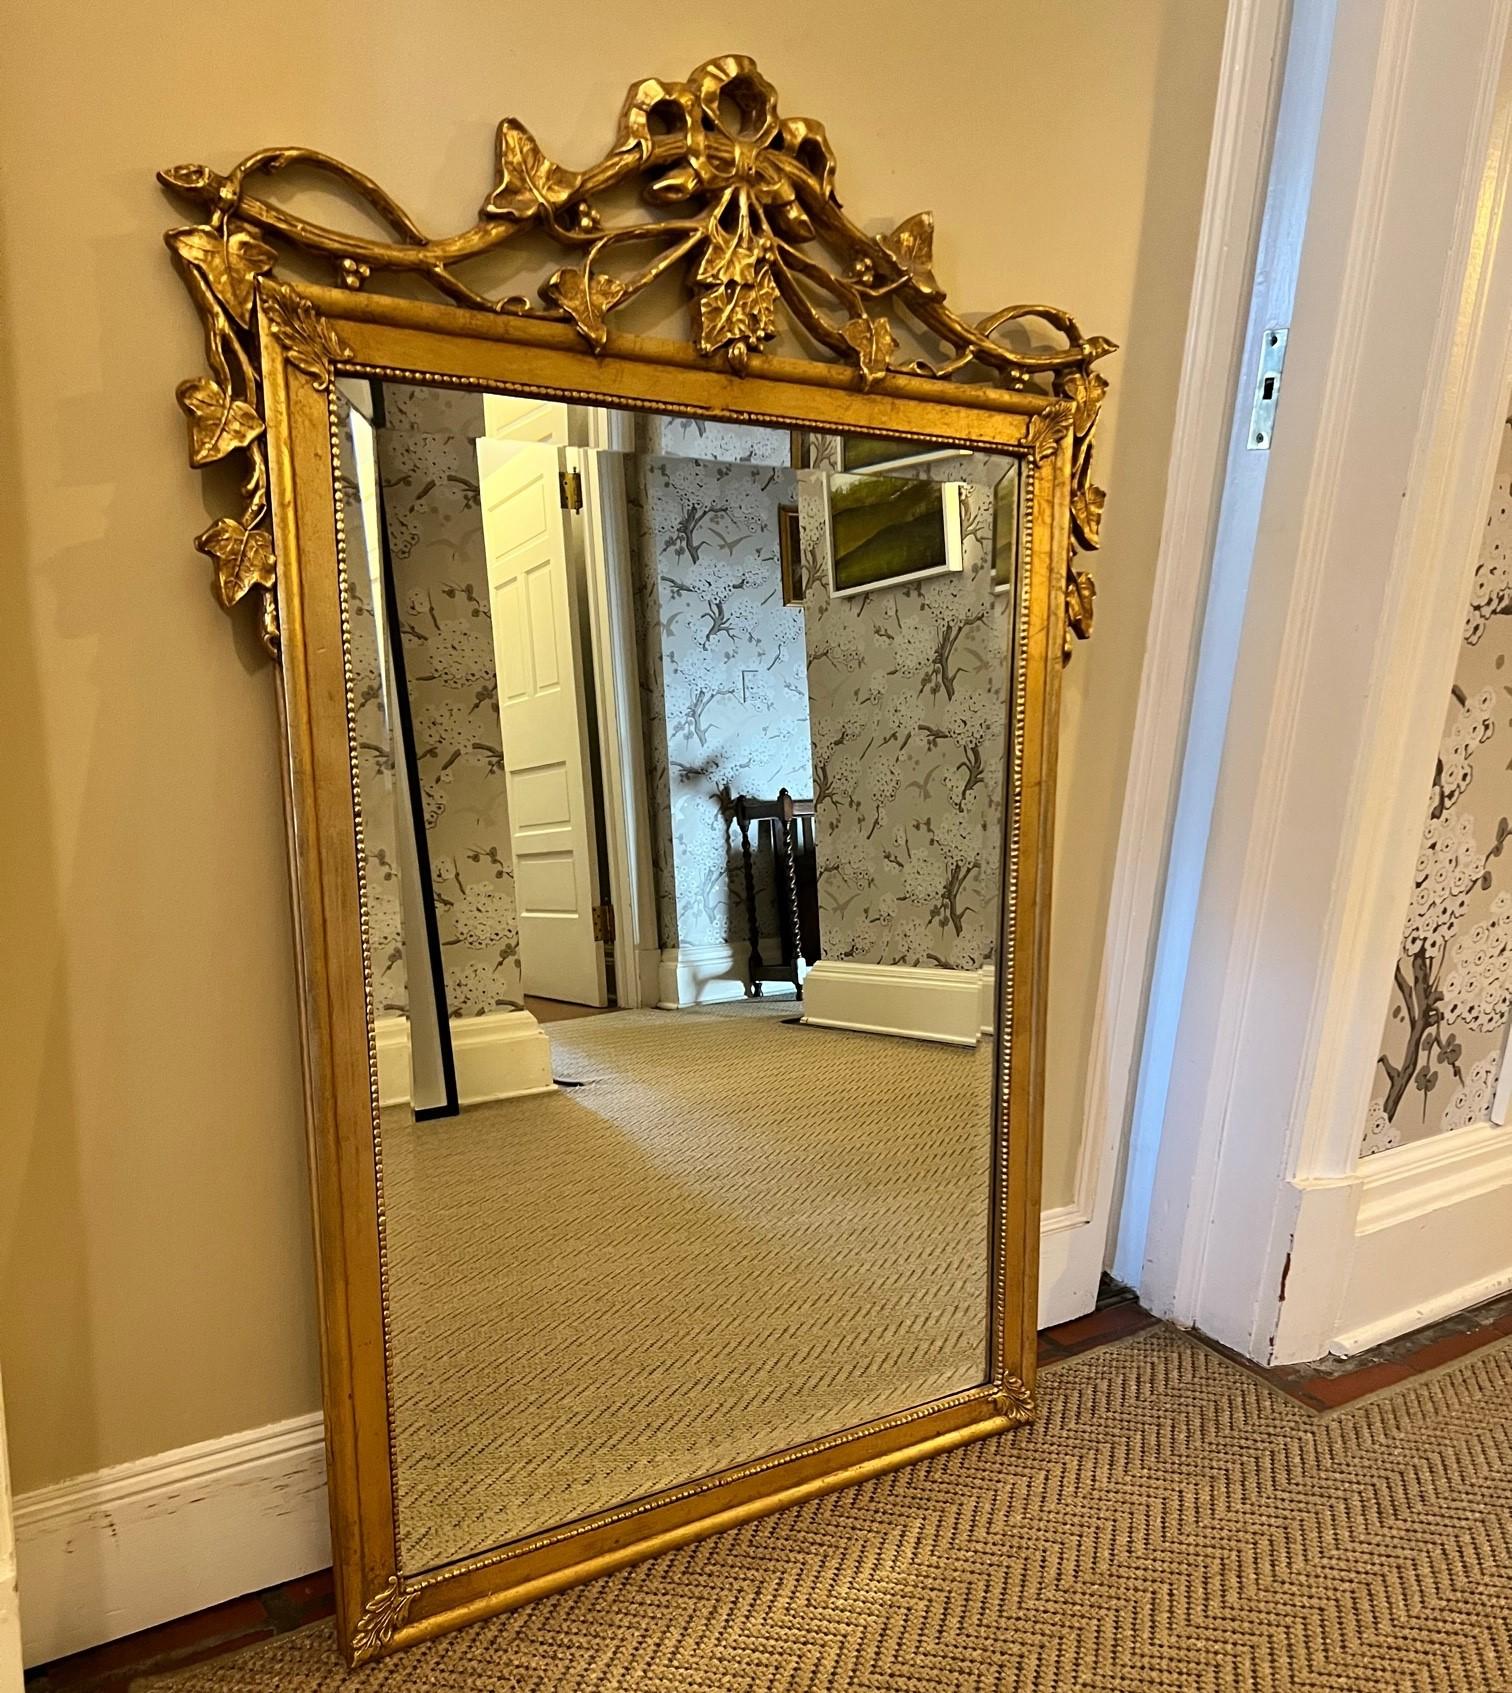 Friedman Brothers Connoisseur Collection. Late XV111 century style gilded mirror in royal gold. From the Friedman Brothers Archive ,style #1496 